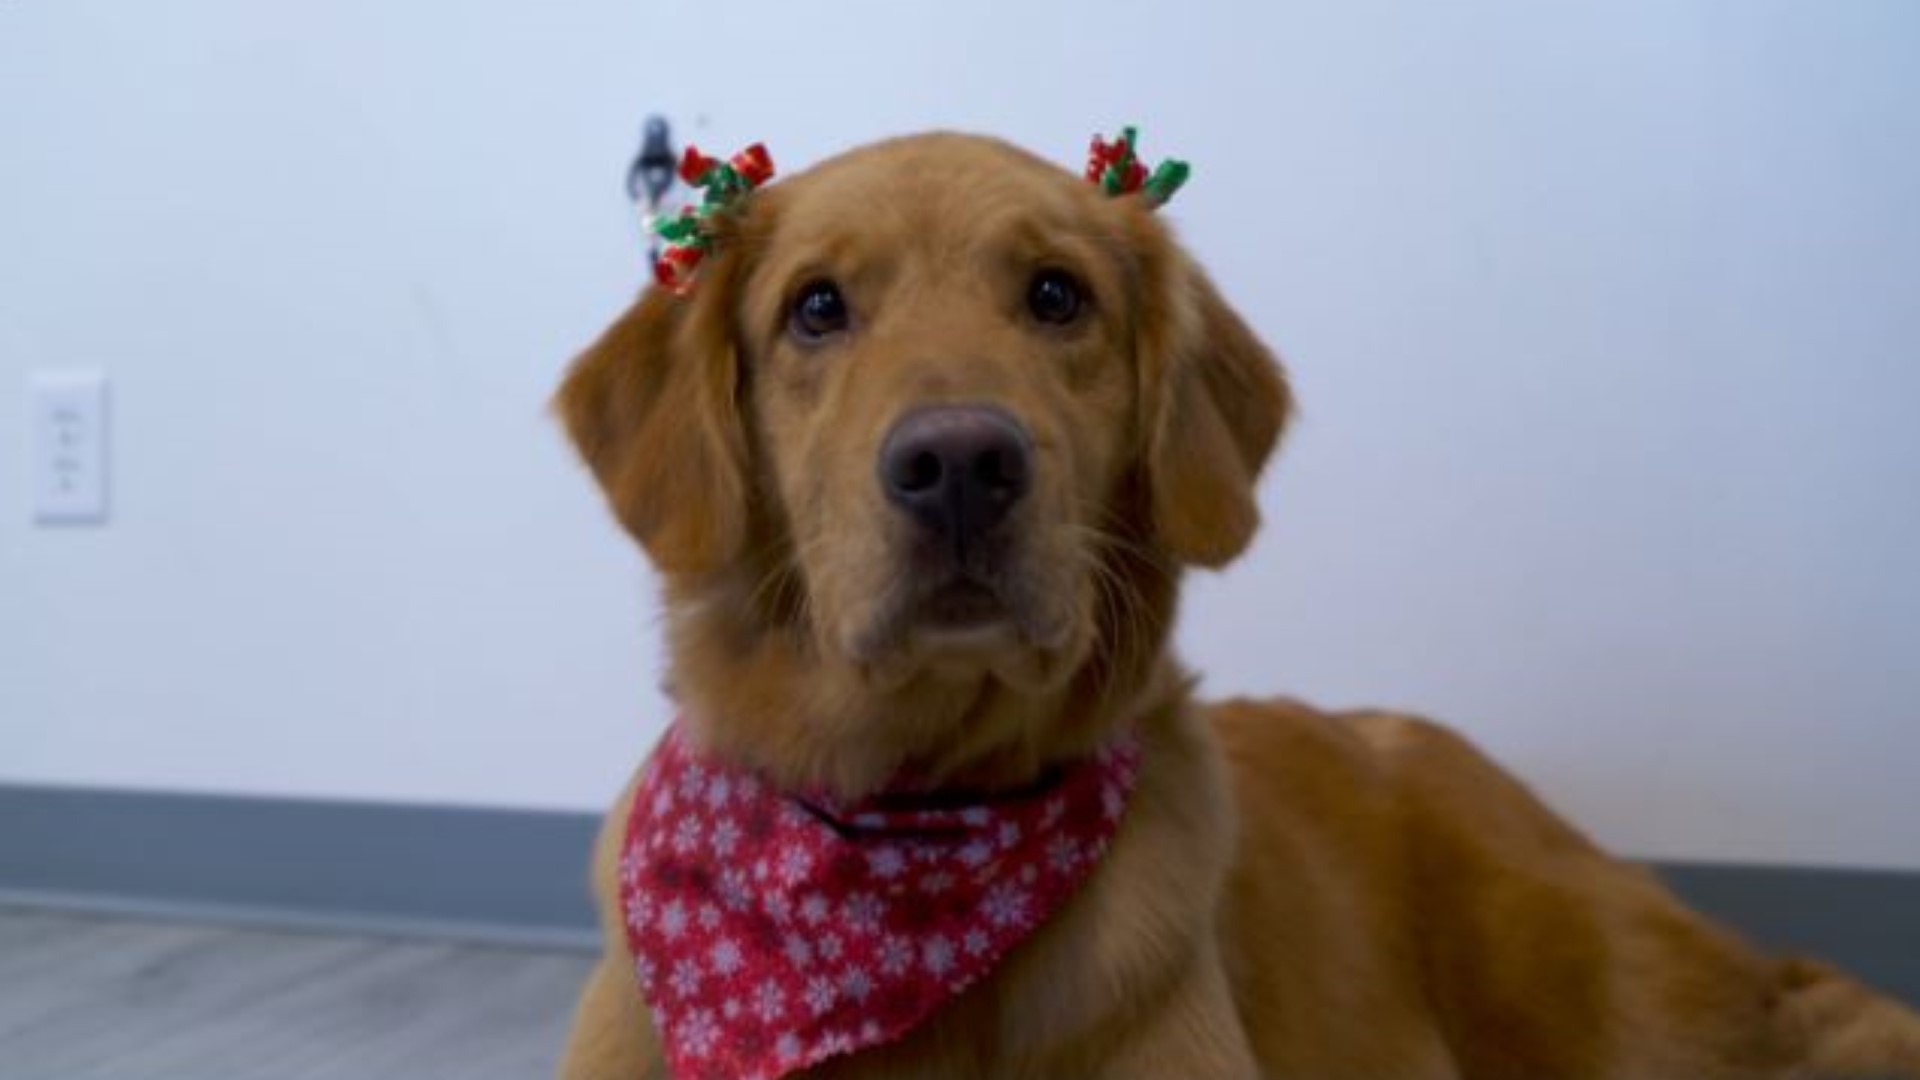 Adore Dog Salon is giving Underdog Rescue dogs a festive fresh look in hopes they'll be adopted this holiday season.